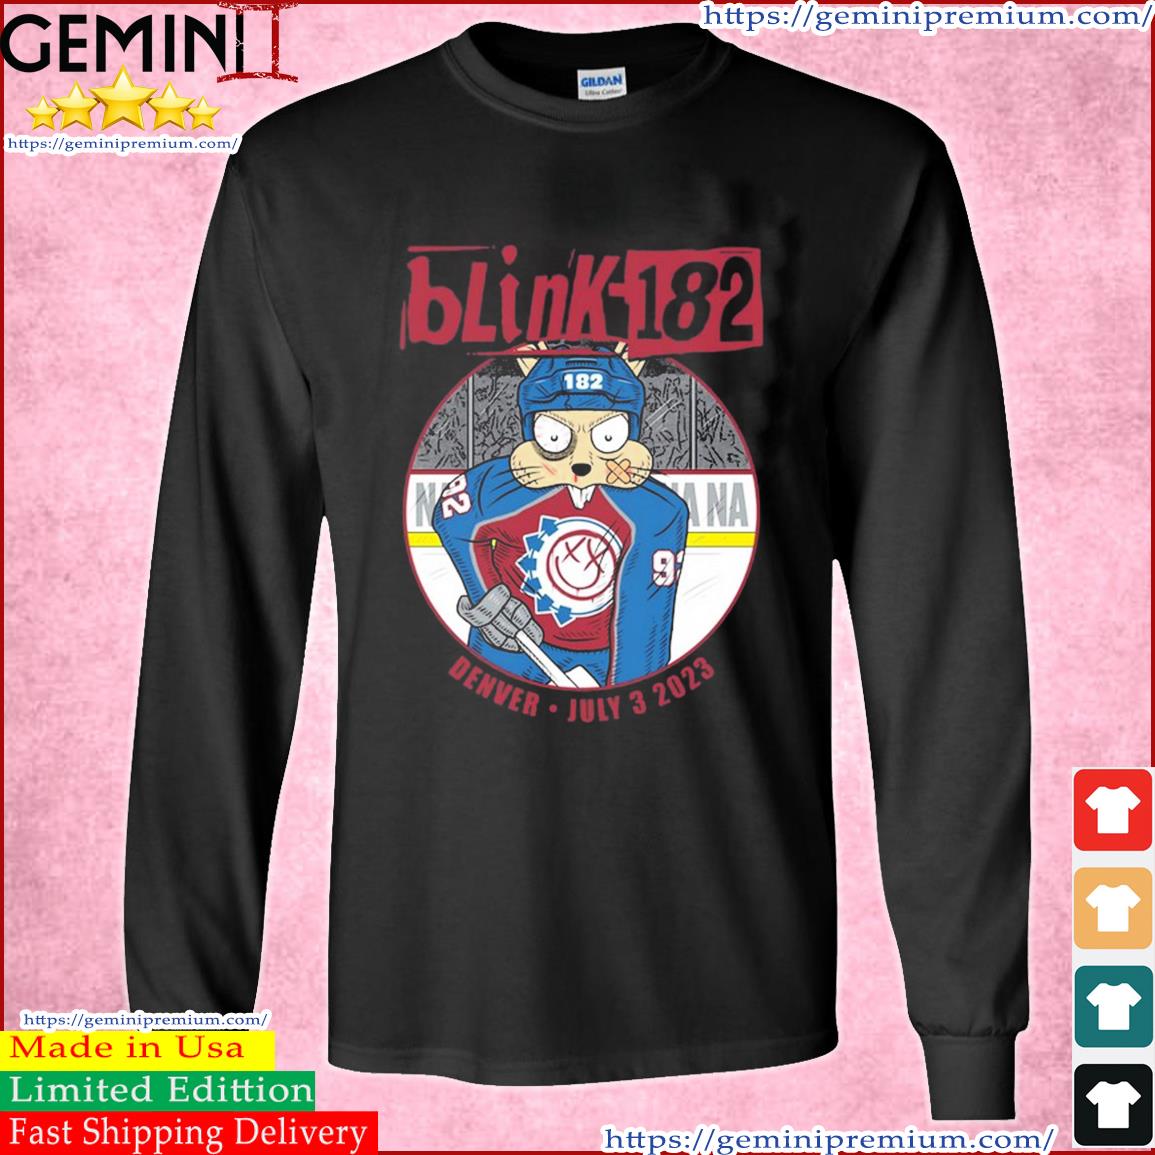 Colorado Avalanche Blink 182 X Shirt,Sweater, Hoodie, And Long